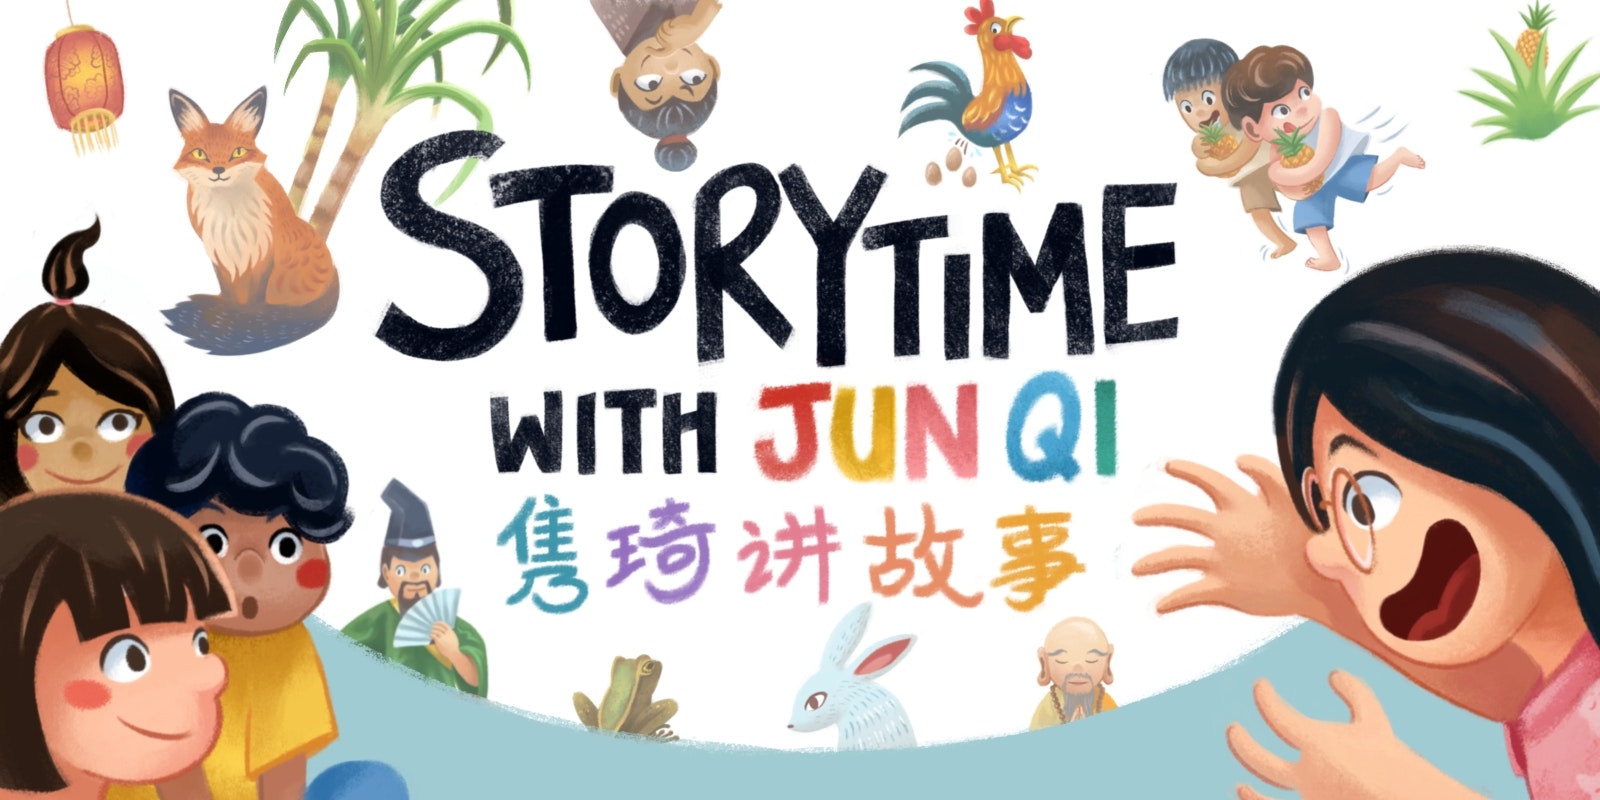 Digital painting and eventbrite banner design for my storytelling sessions at Bedok Library. It shows a caricature of me, hands gesturing as I tell a story to an audeince of children. The speech bubble that comes from my mouth are filled with the colorful characters from my various stories, surrounding the poster title: Storytime with Jun Qi, in English and Mandarin